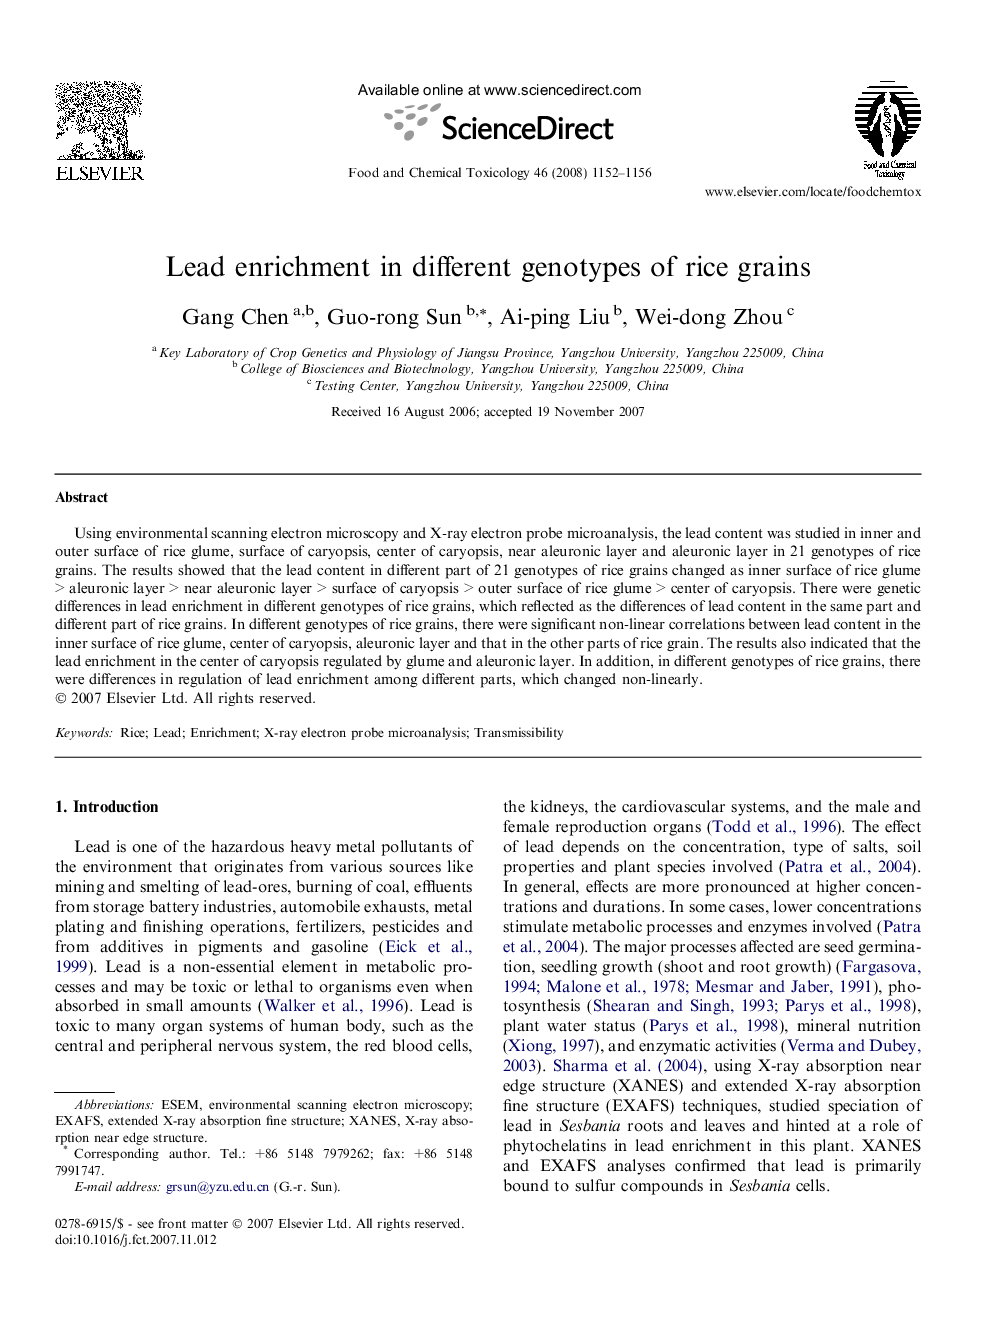 Lead enrichment in different genotypes of rice grains